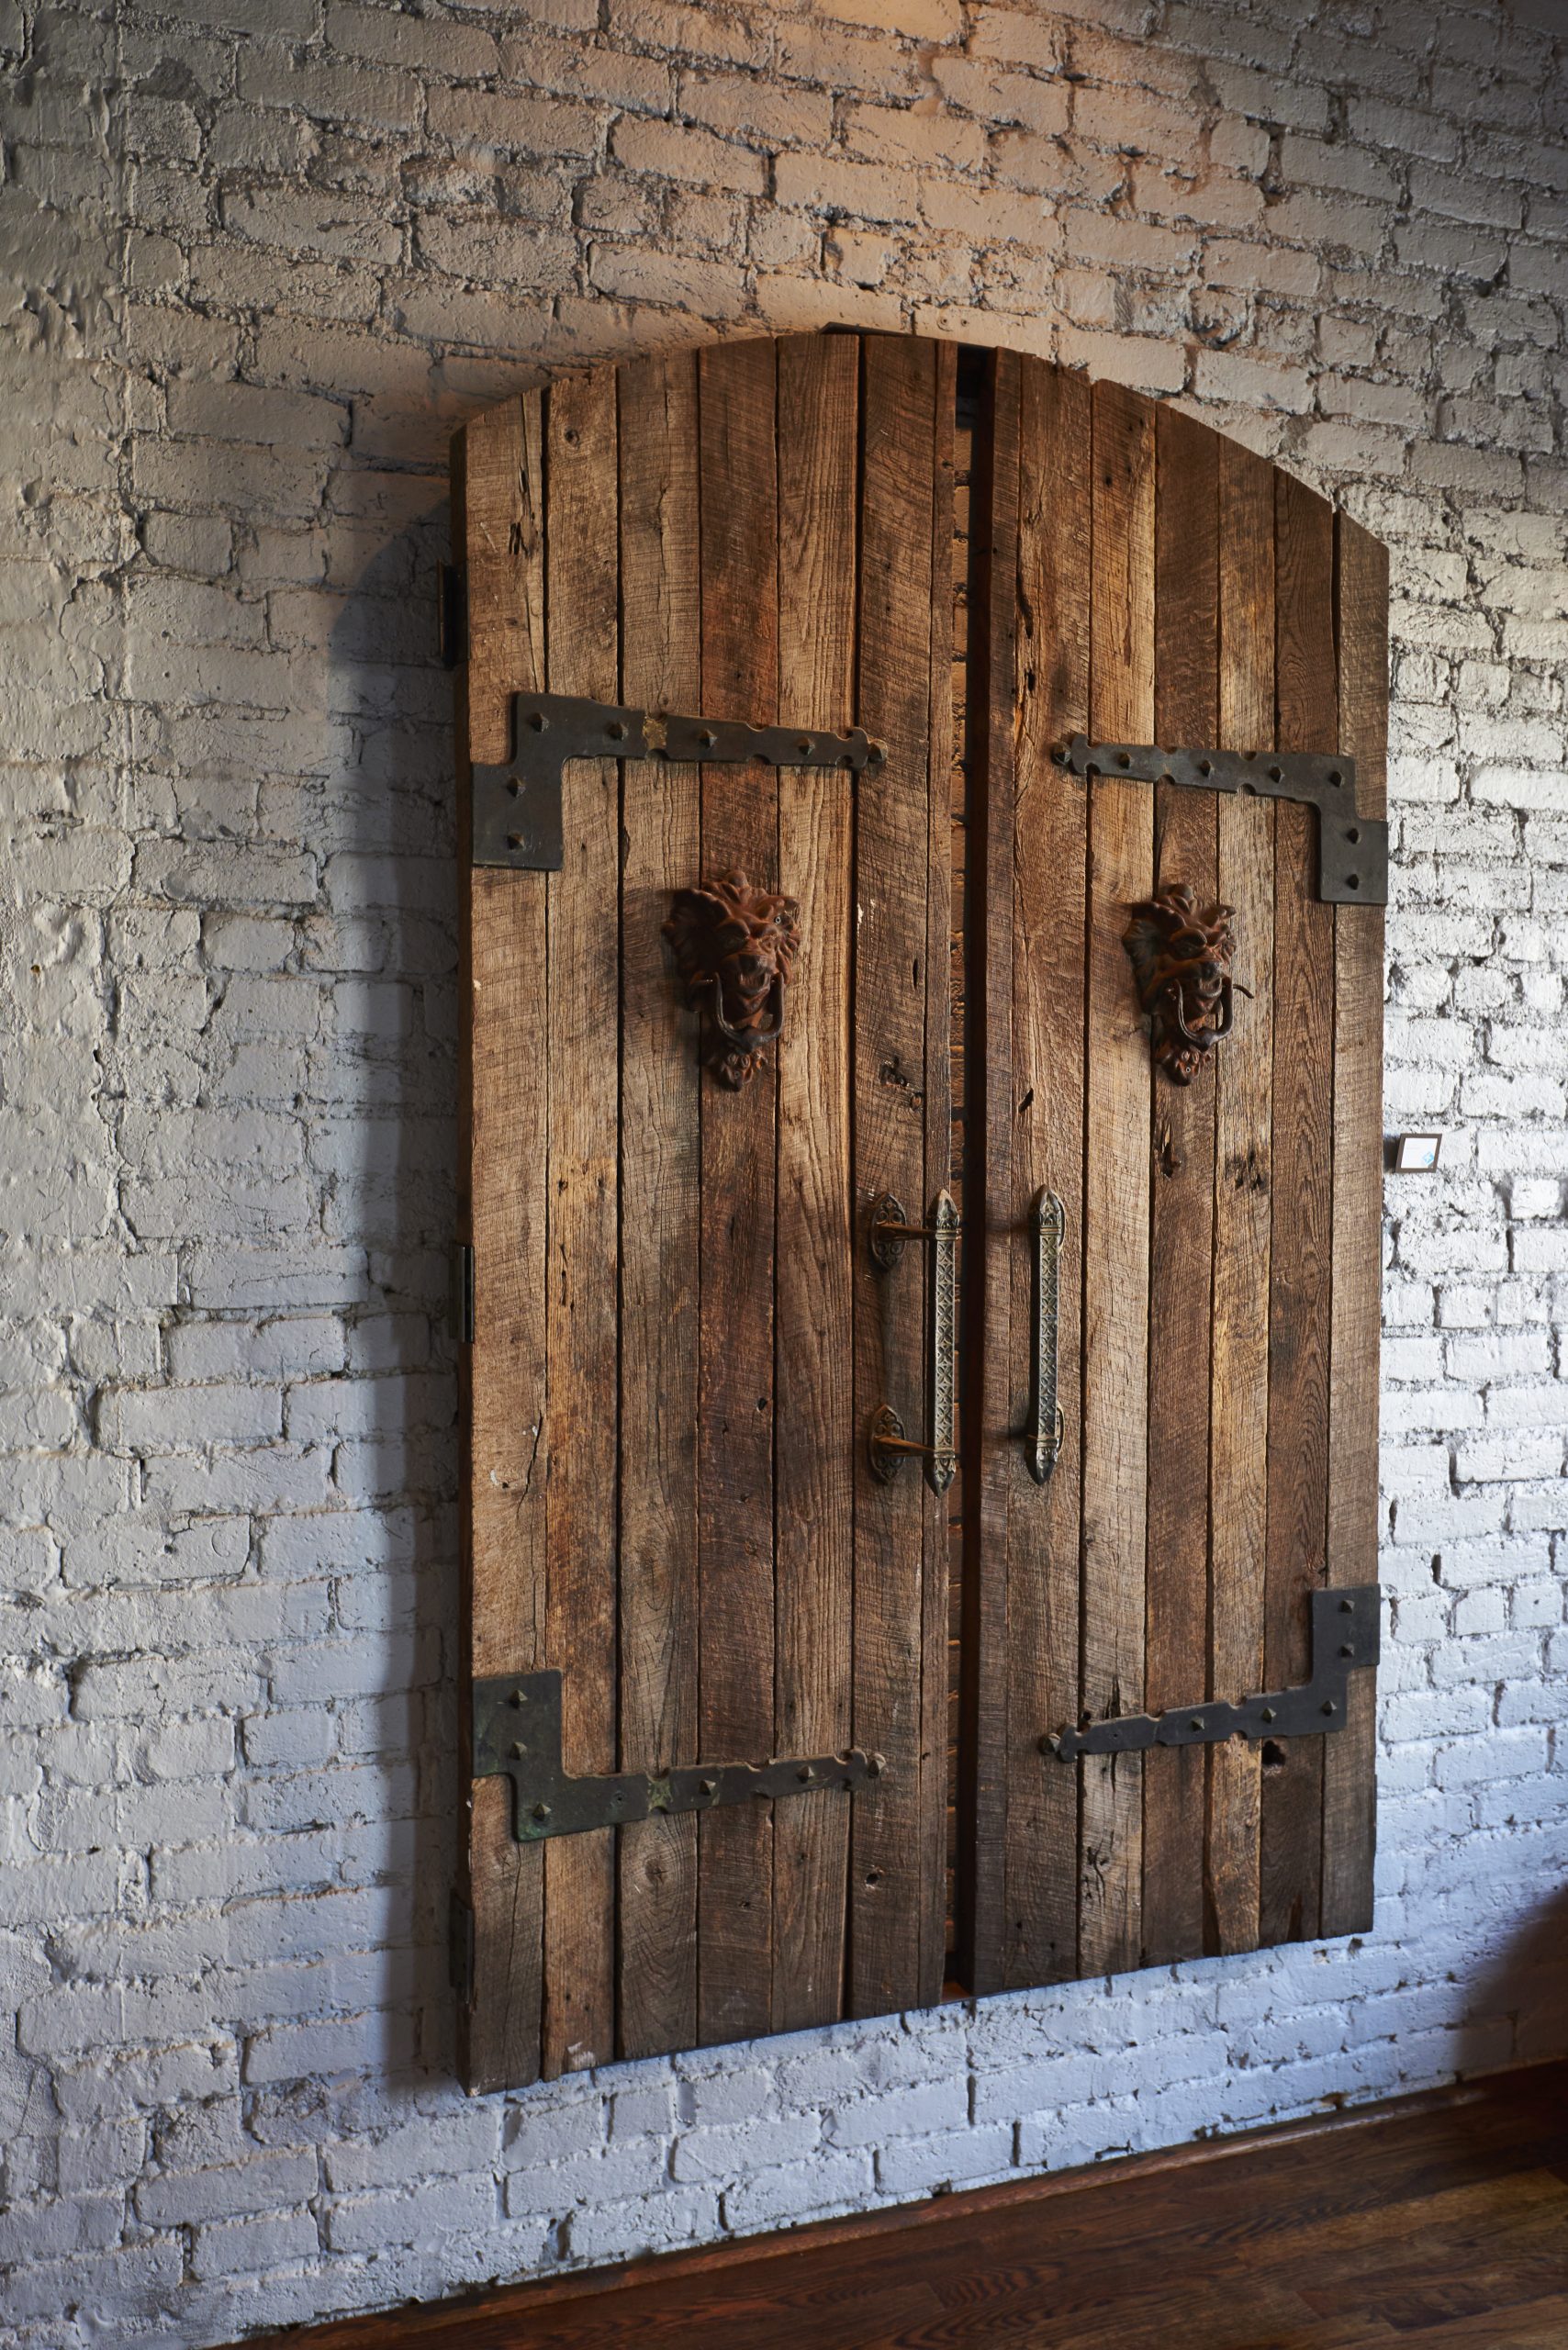 Photo of old doors made of wood and iron hanging on brick wall.